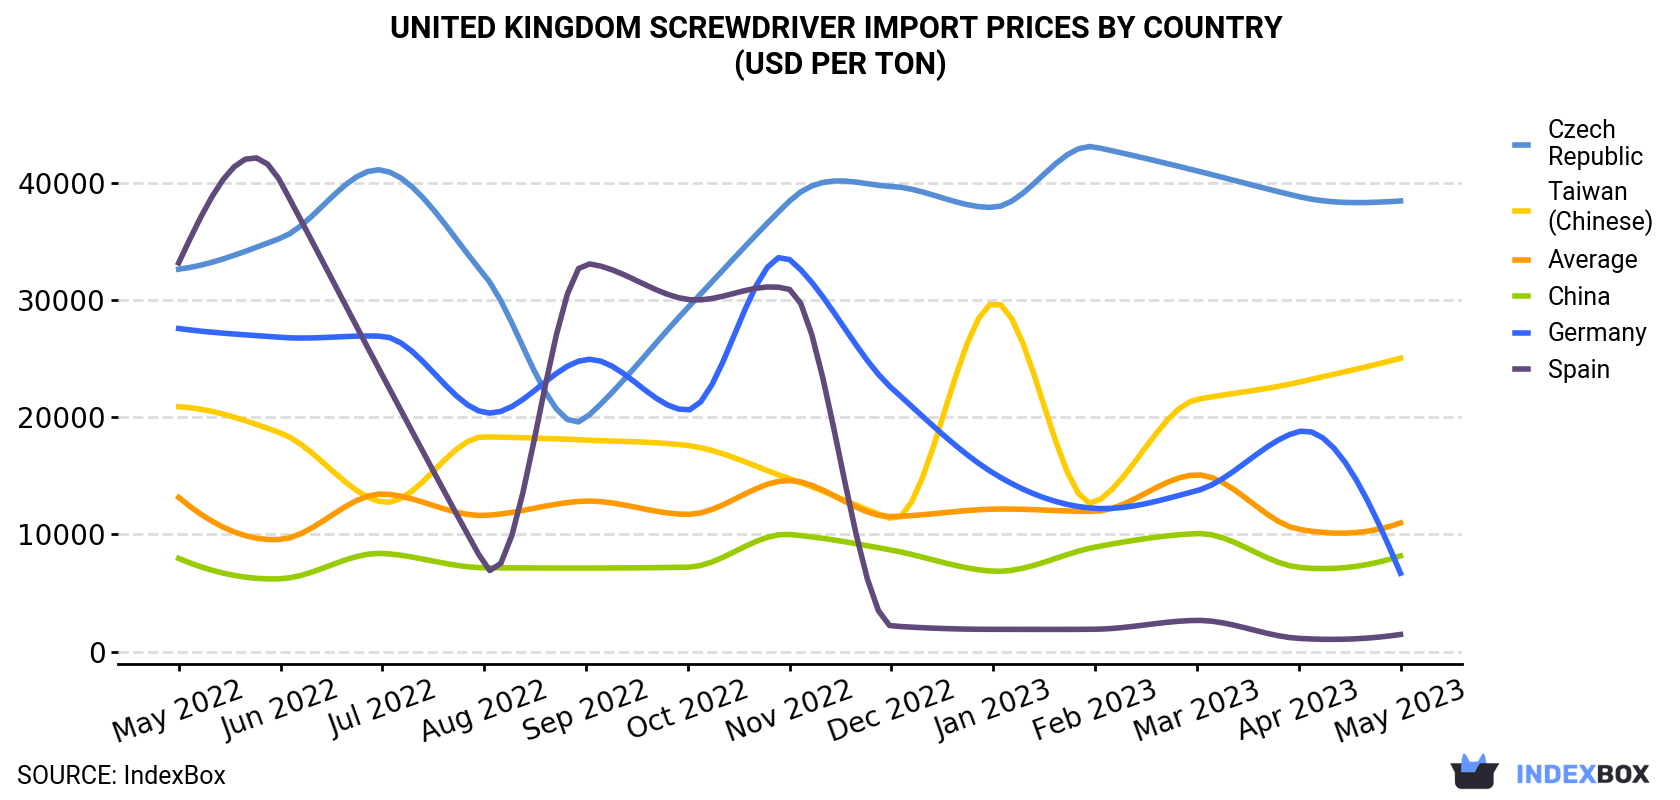 United Kingdom Screwdriver Import Prices By Country (USD Per Ton)